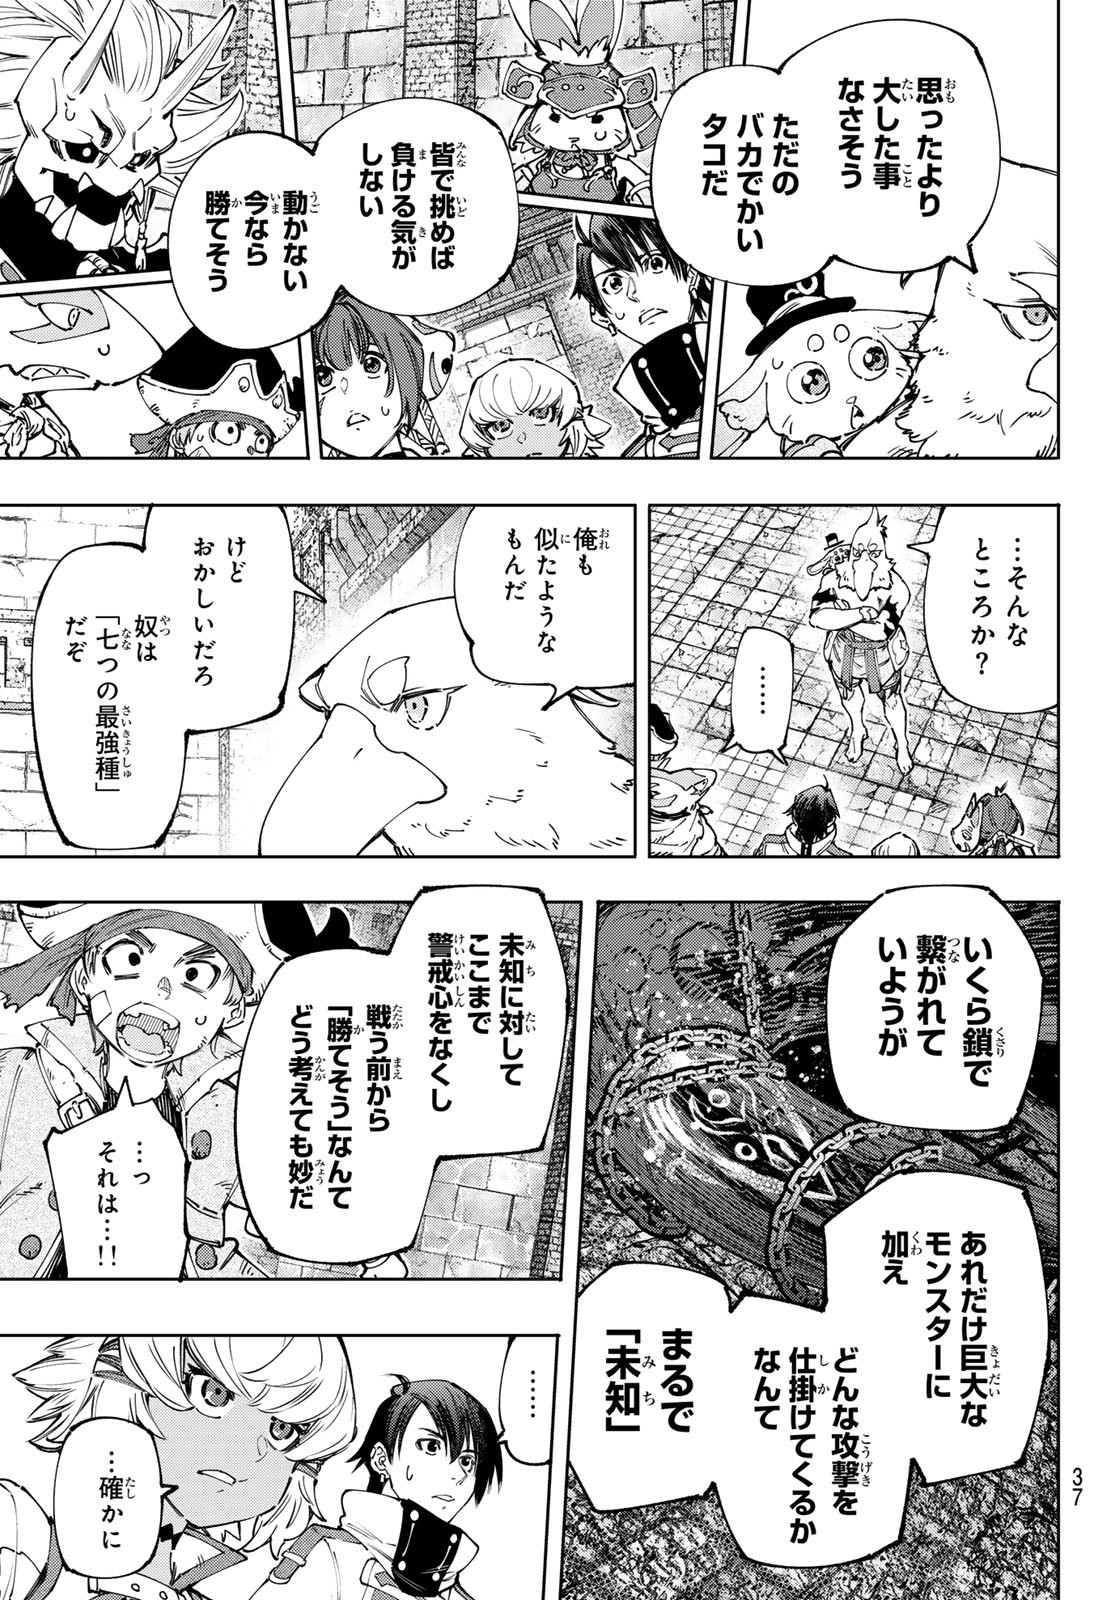 Weekly Shōnen Magazine - 週刊少年マガジン - Chapter 2024-24 - Page 37